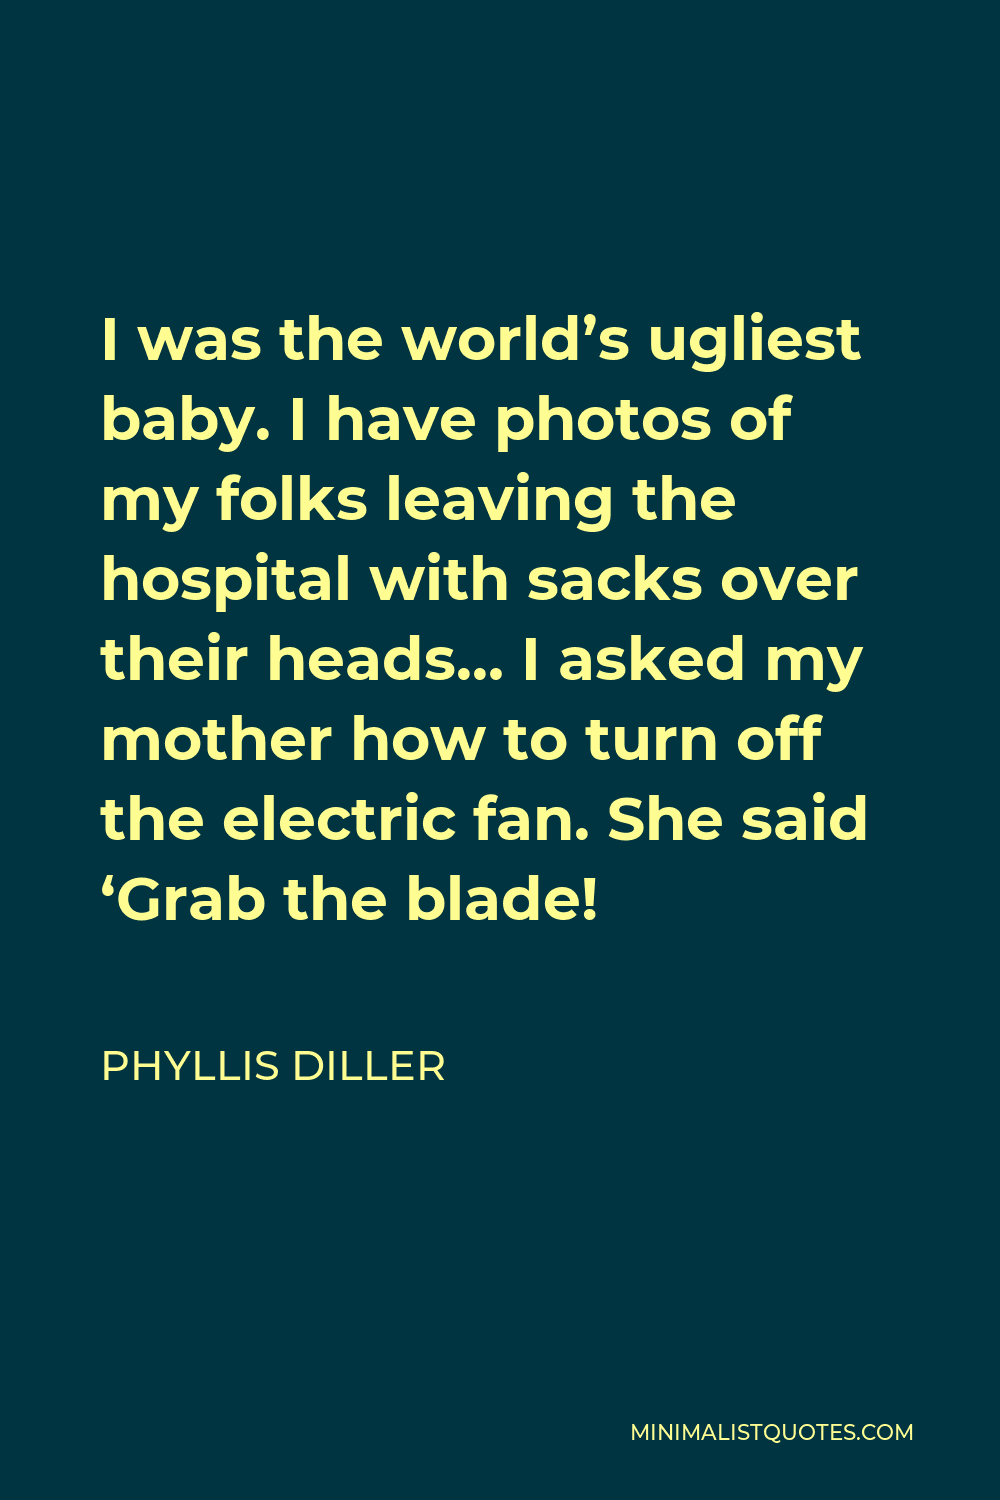 Phyllis Diller Quote - I was the world’s ugliest baby. I have photos of my folks leaving the hospital with sacks over their heads… I asked my mother how to turn off the electric fan. She said ‘Grab the blade!